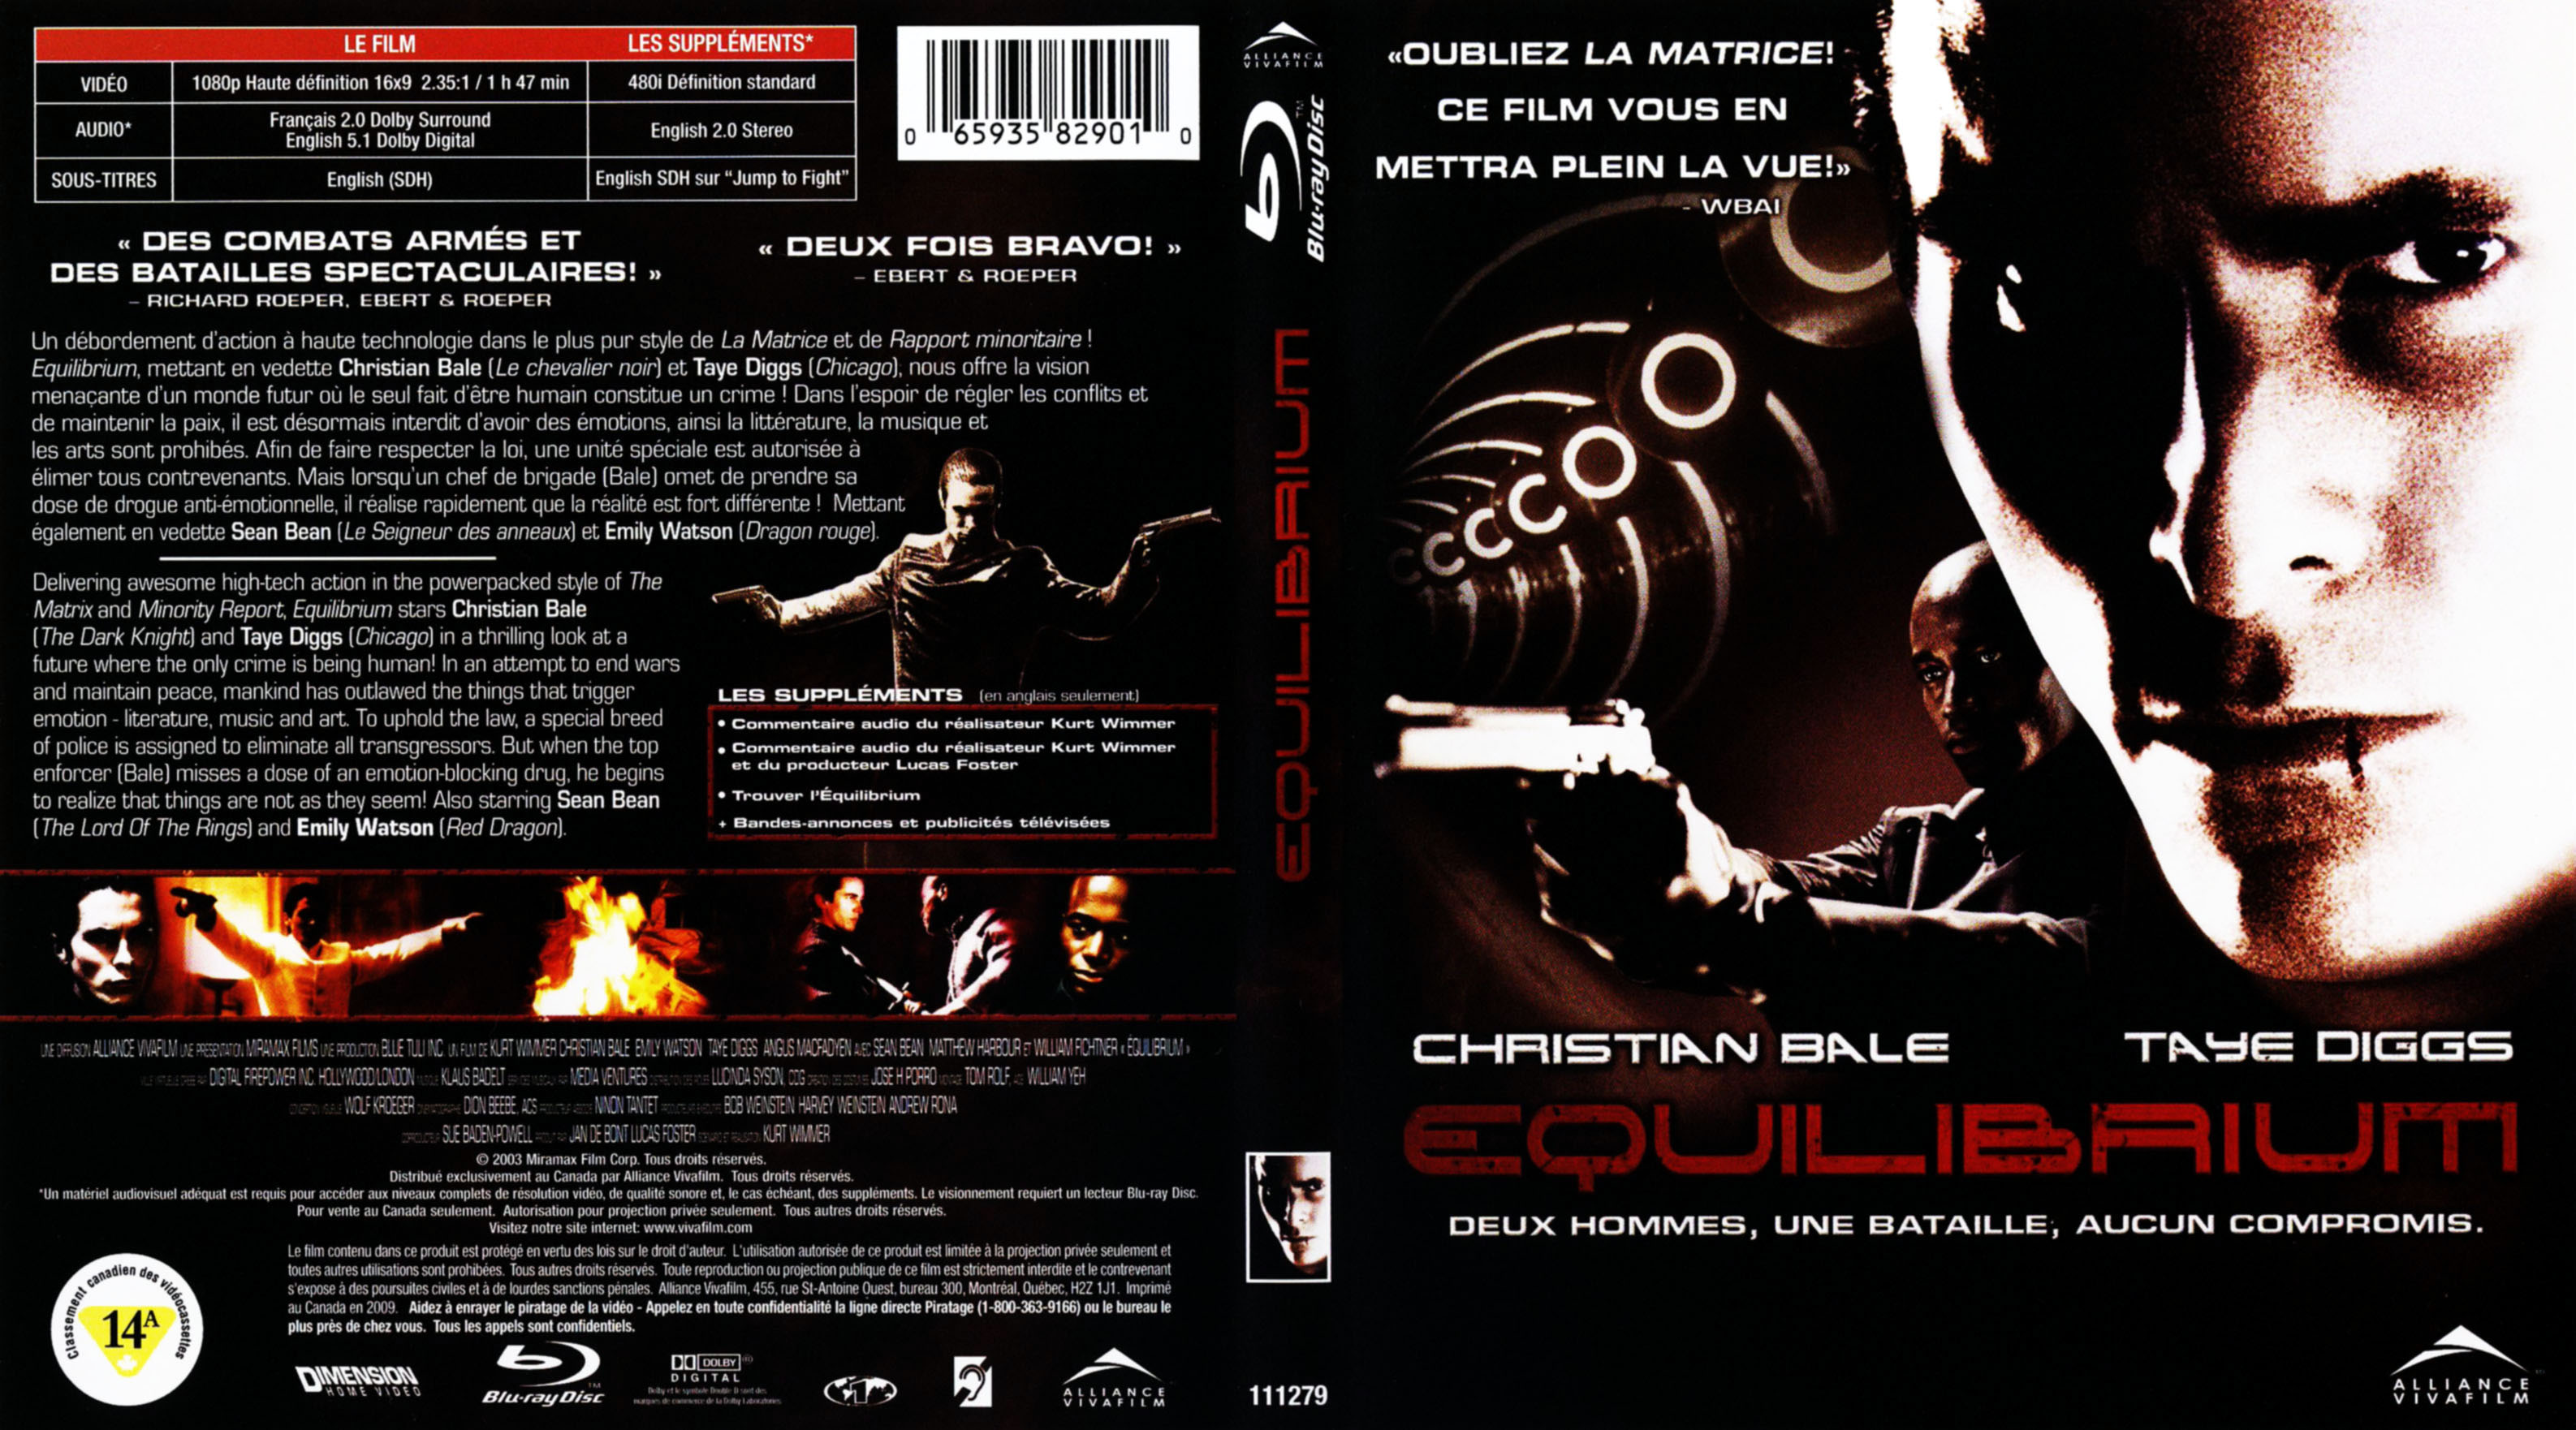 Jaquette DVD Equilibrium (Canadienne) (BLU-RAY)